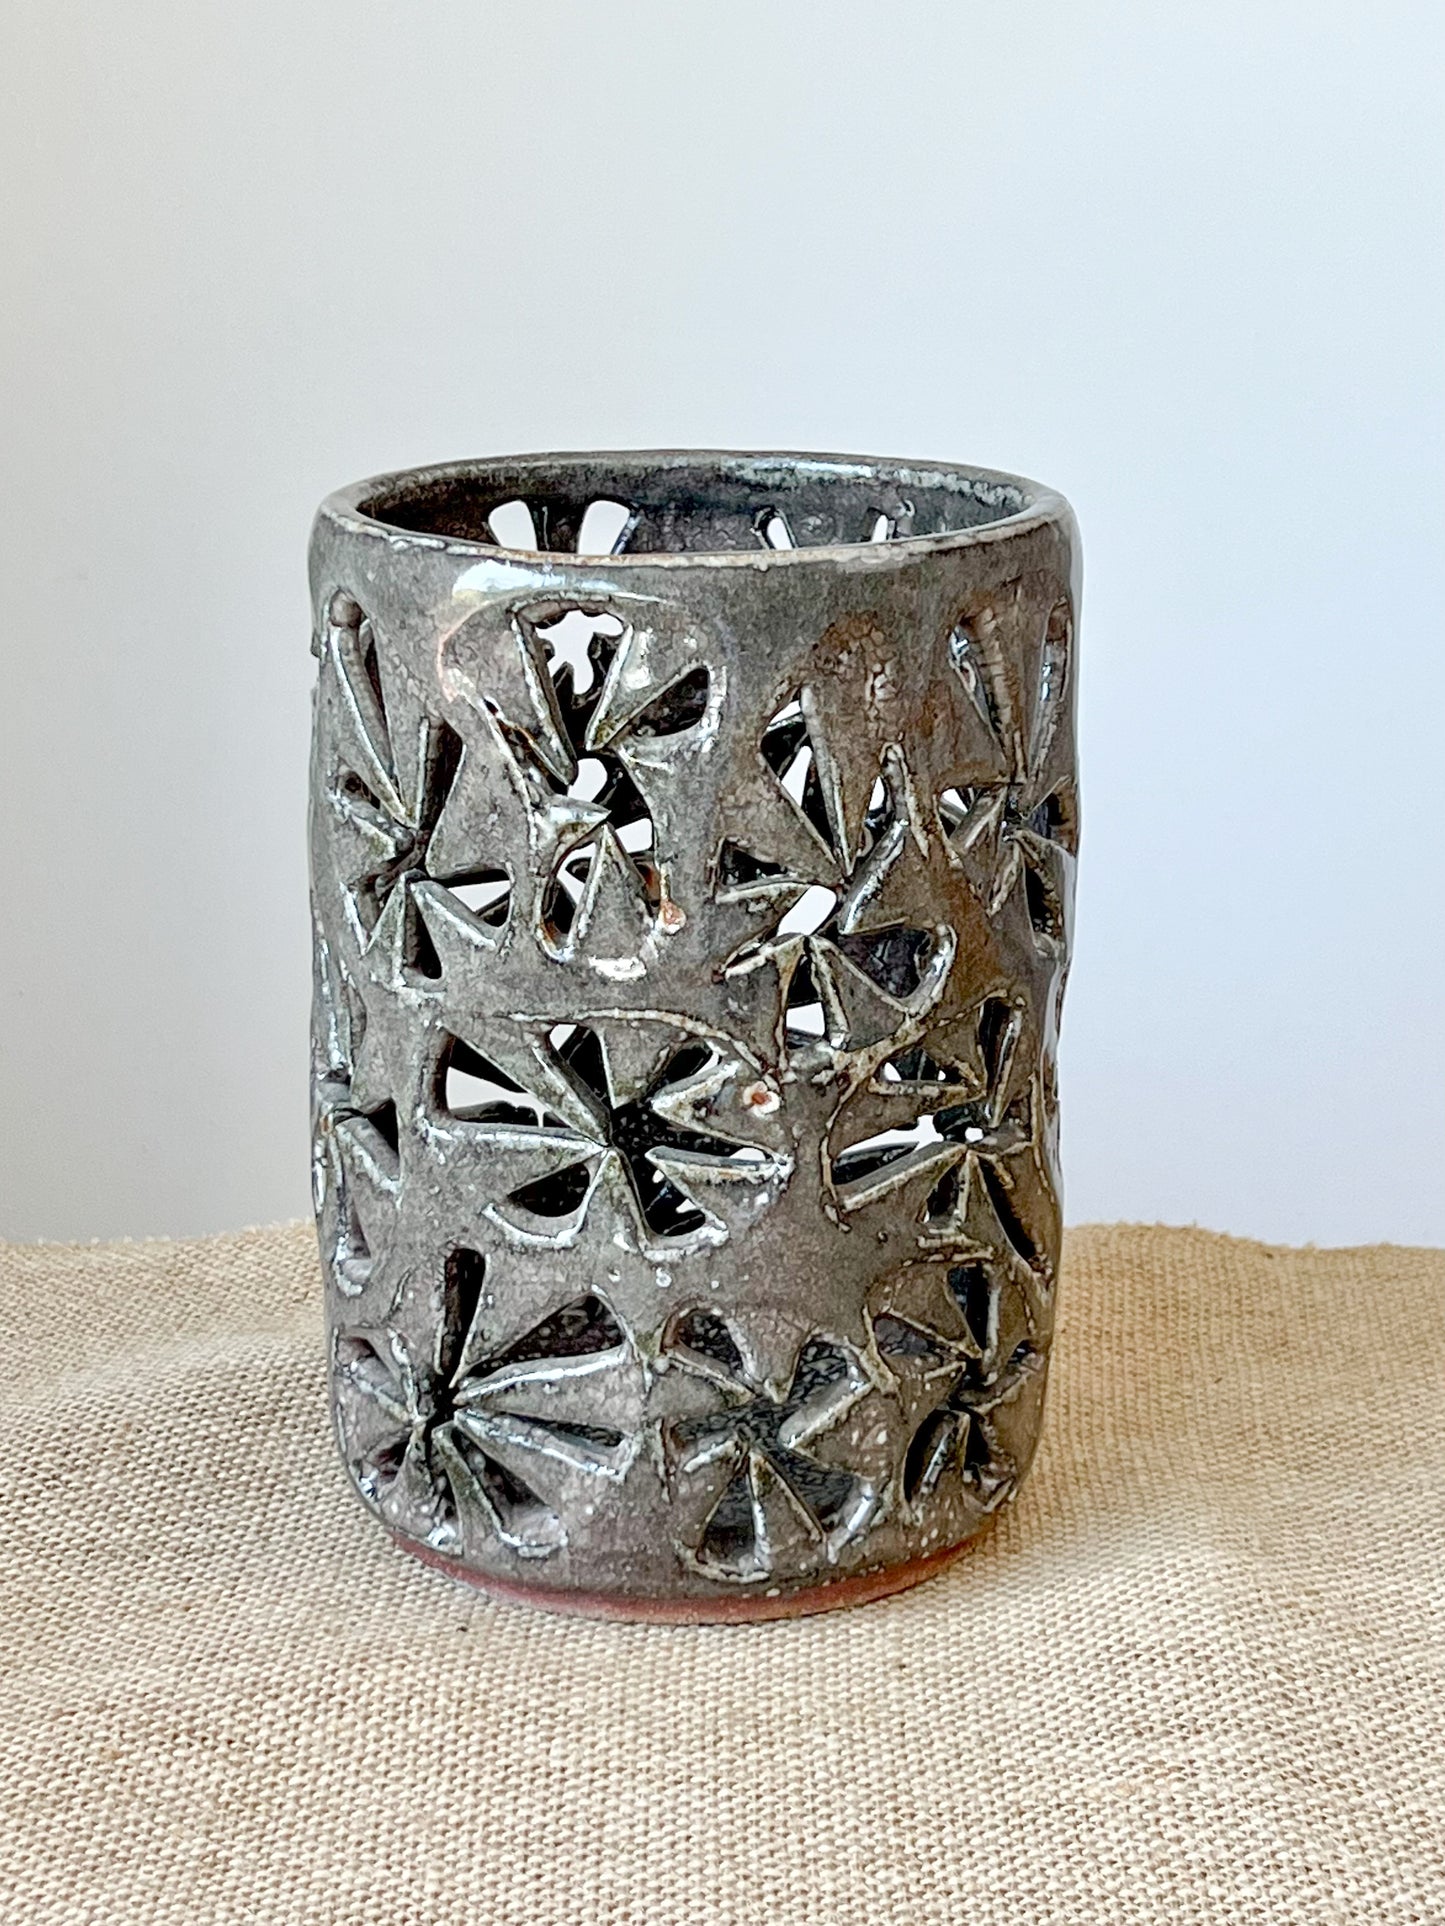 Wheel thrown using stoneware clay. Hand carved with pinwheel pattern to let light through. A warm gray glaze covers the piece. Simply add a candle to fairy lights.